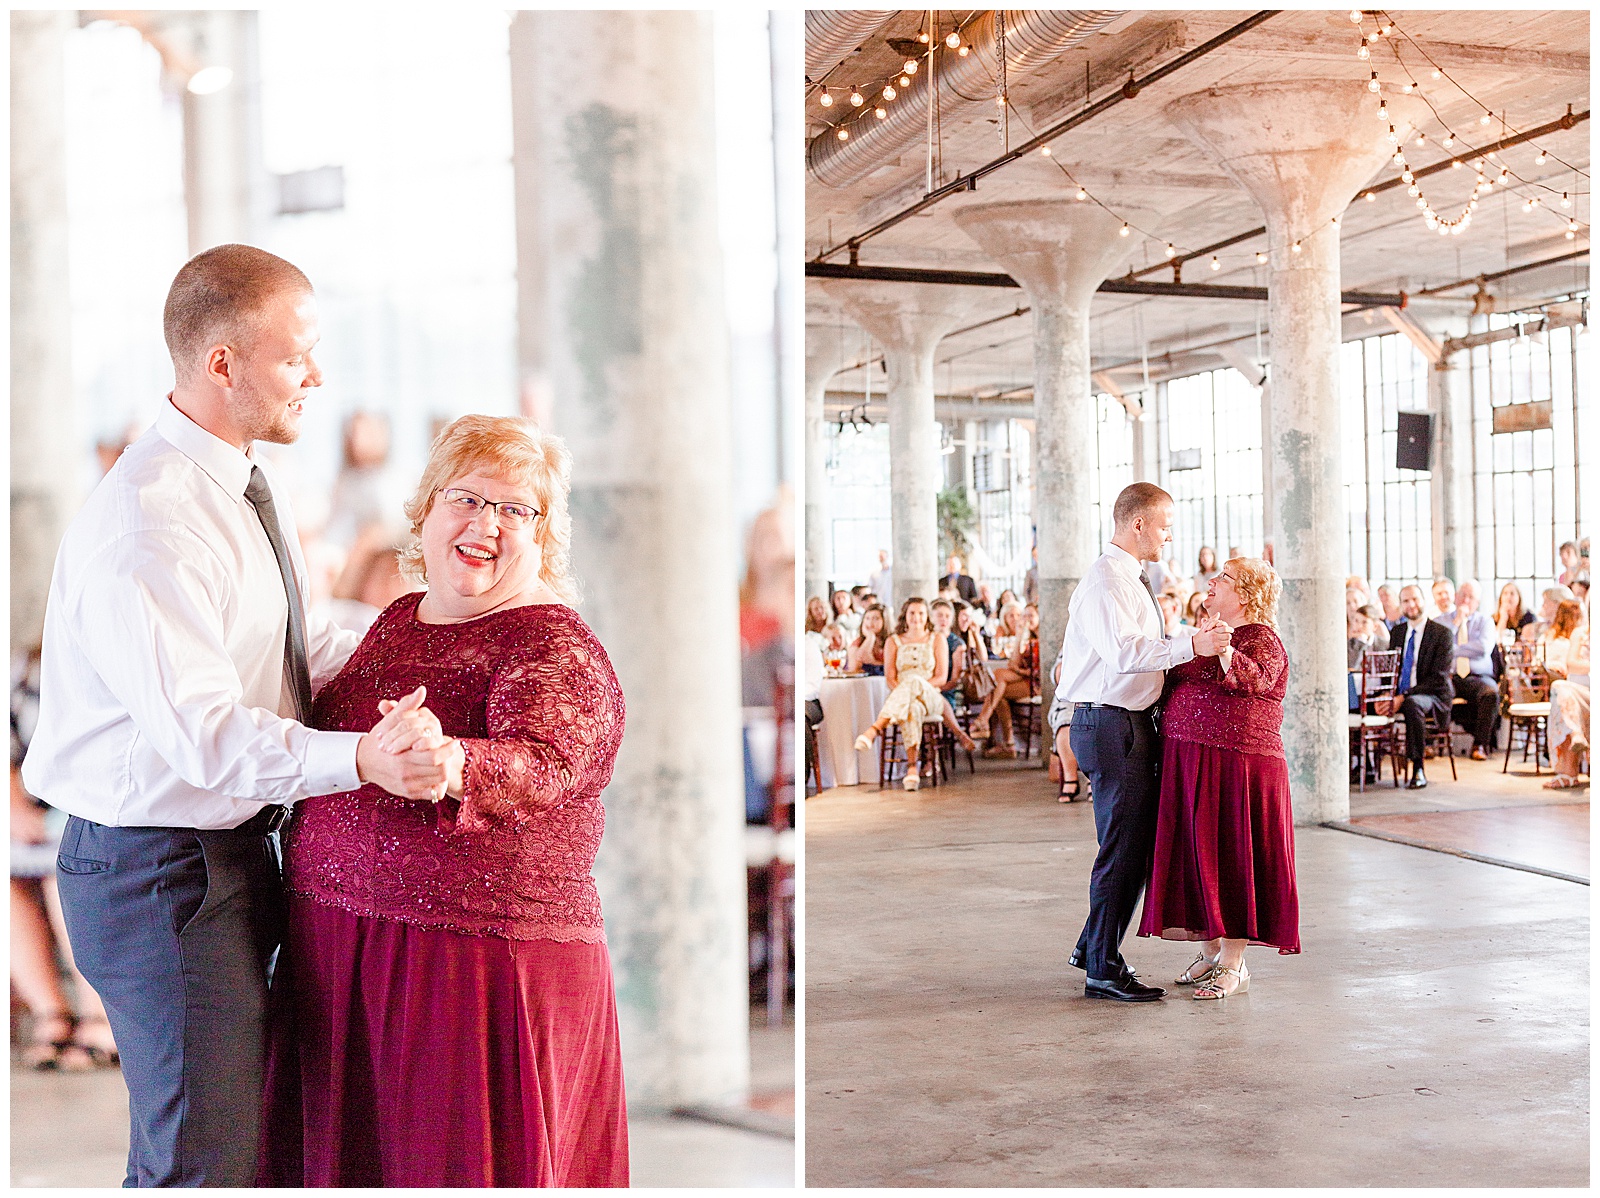 Sweet Groom and Mom Mother-Son dance at Rustic Airy Indoor Wedding Venue with fairy lights in Elegant Modern Summer Wedding in Charlotte, NC | check out the full wedding at KevynDixonPhoto.com